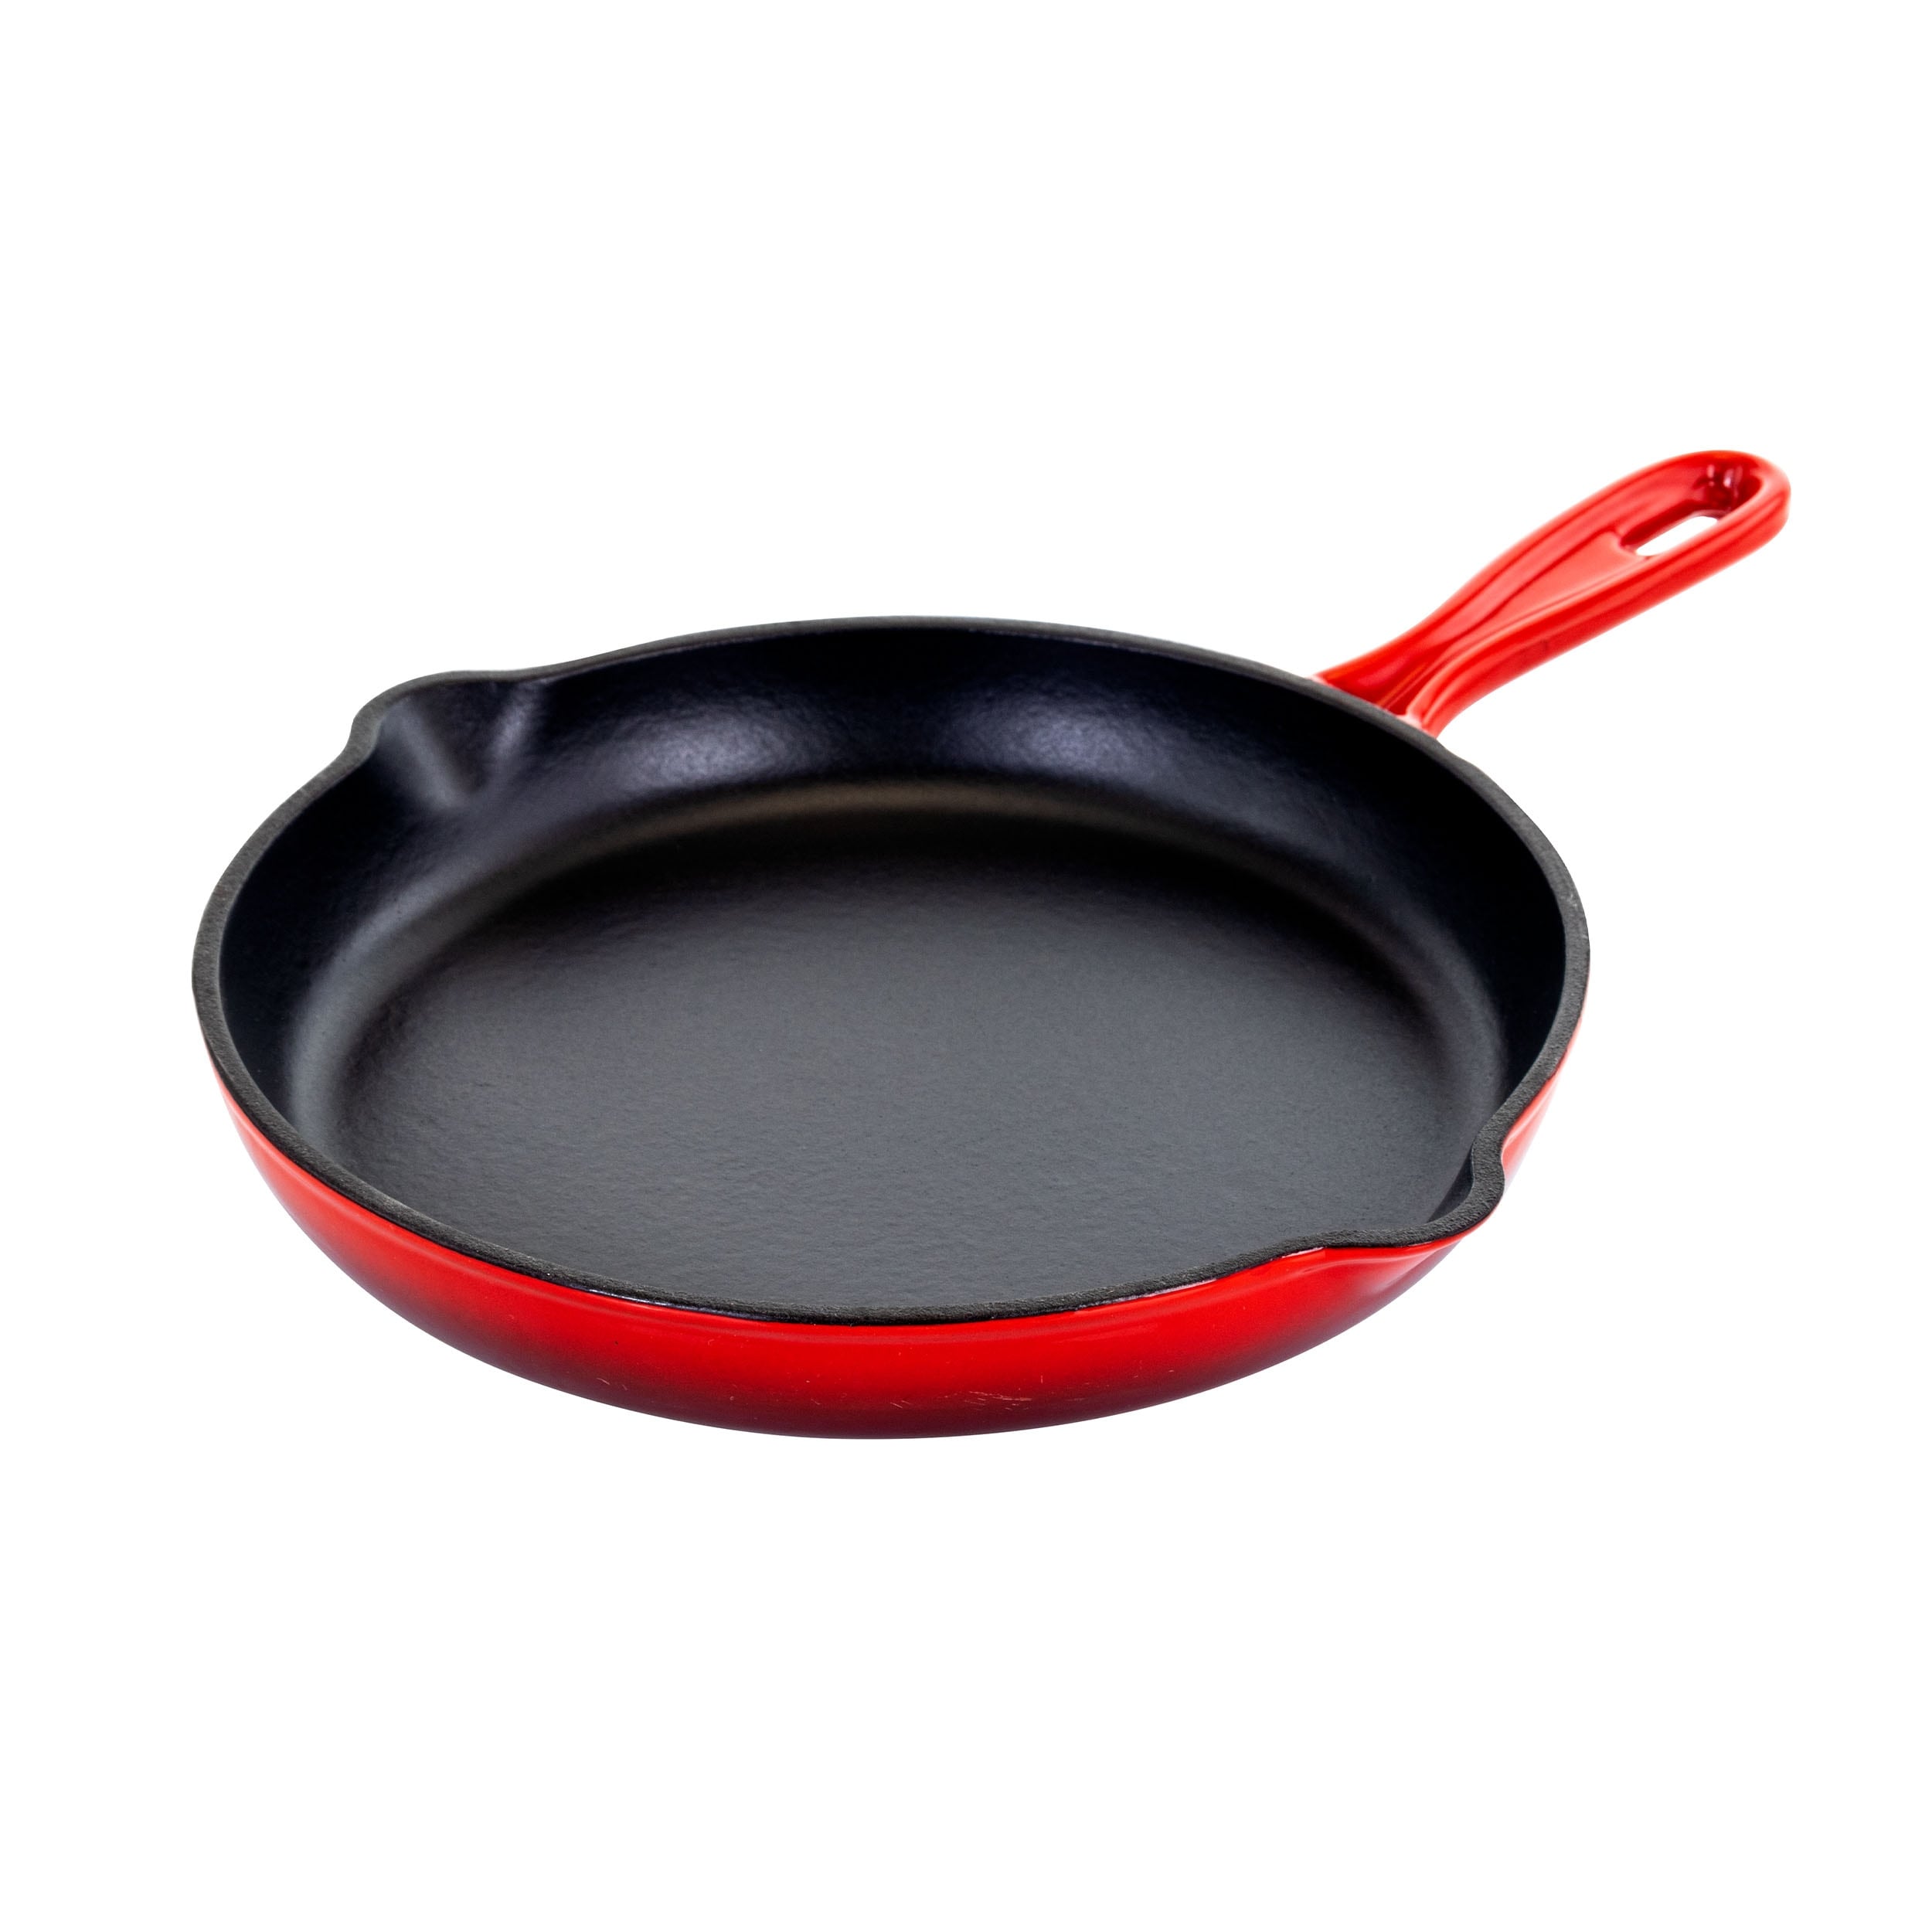 https://ak1.ostkcdn.com/images/products/is/images/direct/1af86d22daa9a87c72cf94be3128c833fb441a23/MegaChef-Round-10.25in-Cast-Iron-Skillet-with-Ombre-Enameled-Coating.jpg